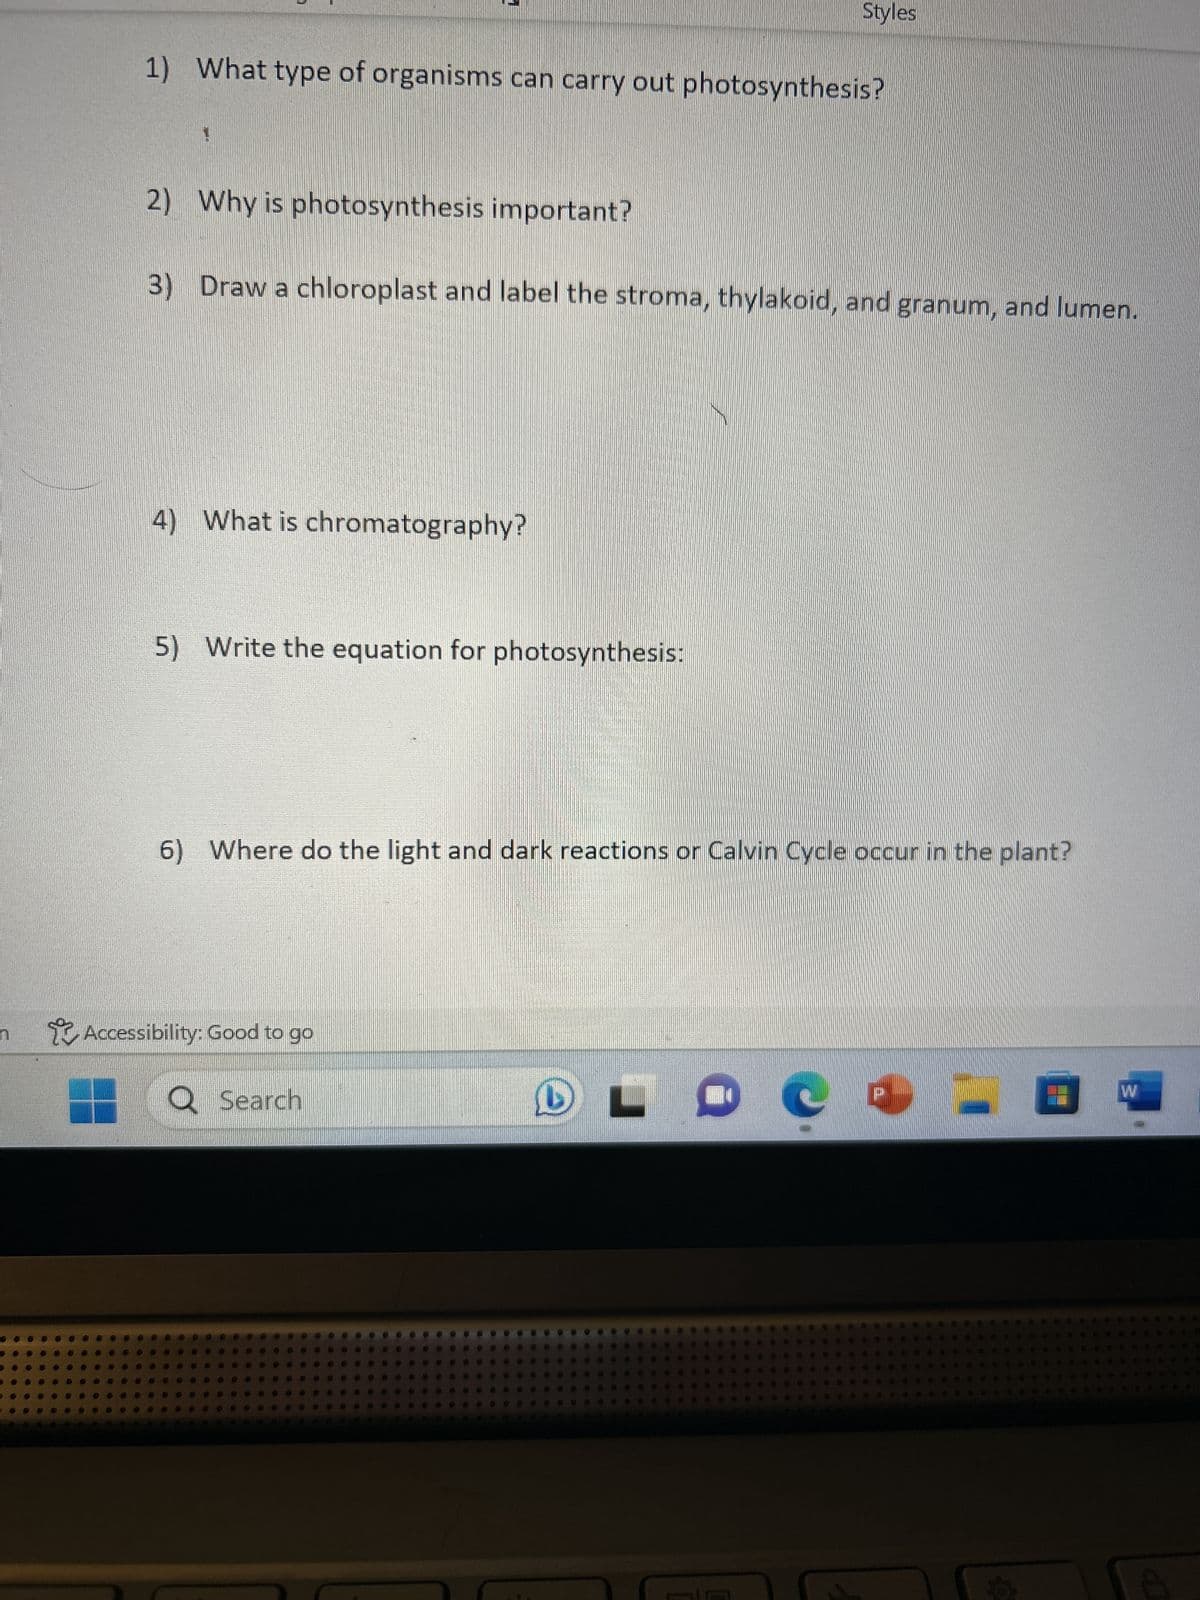 1) What type of organisms can carry out photosynthesis?
2) Why is photosynthesis important?
3)
Draw a chloroplast and label the stroma, thylakoid, and granum, and lumen.
4) What is chromatography?
5) Write the equation for photosynthesis:
Styles
6) Where do the light and dark reactions or Calvin Cycle occur in the plant?
Accessibility: Good to go
Q Search
L
29 9
d